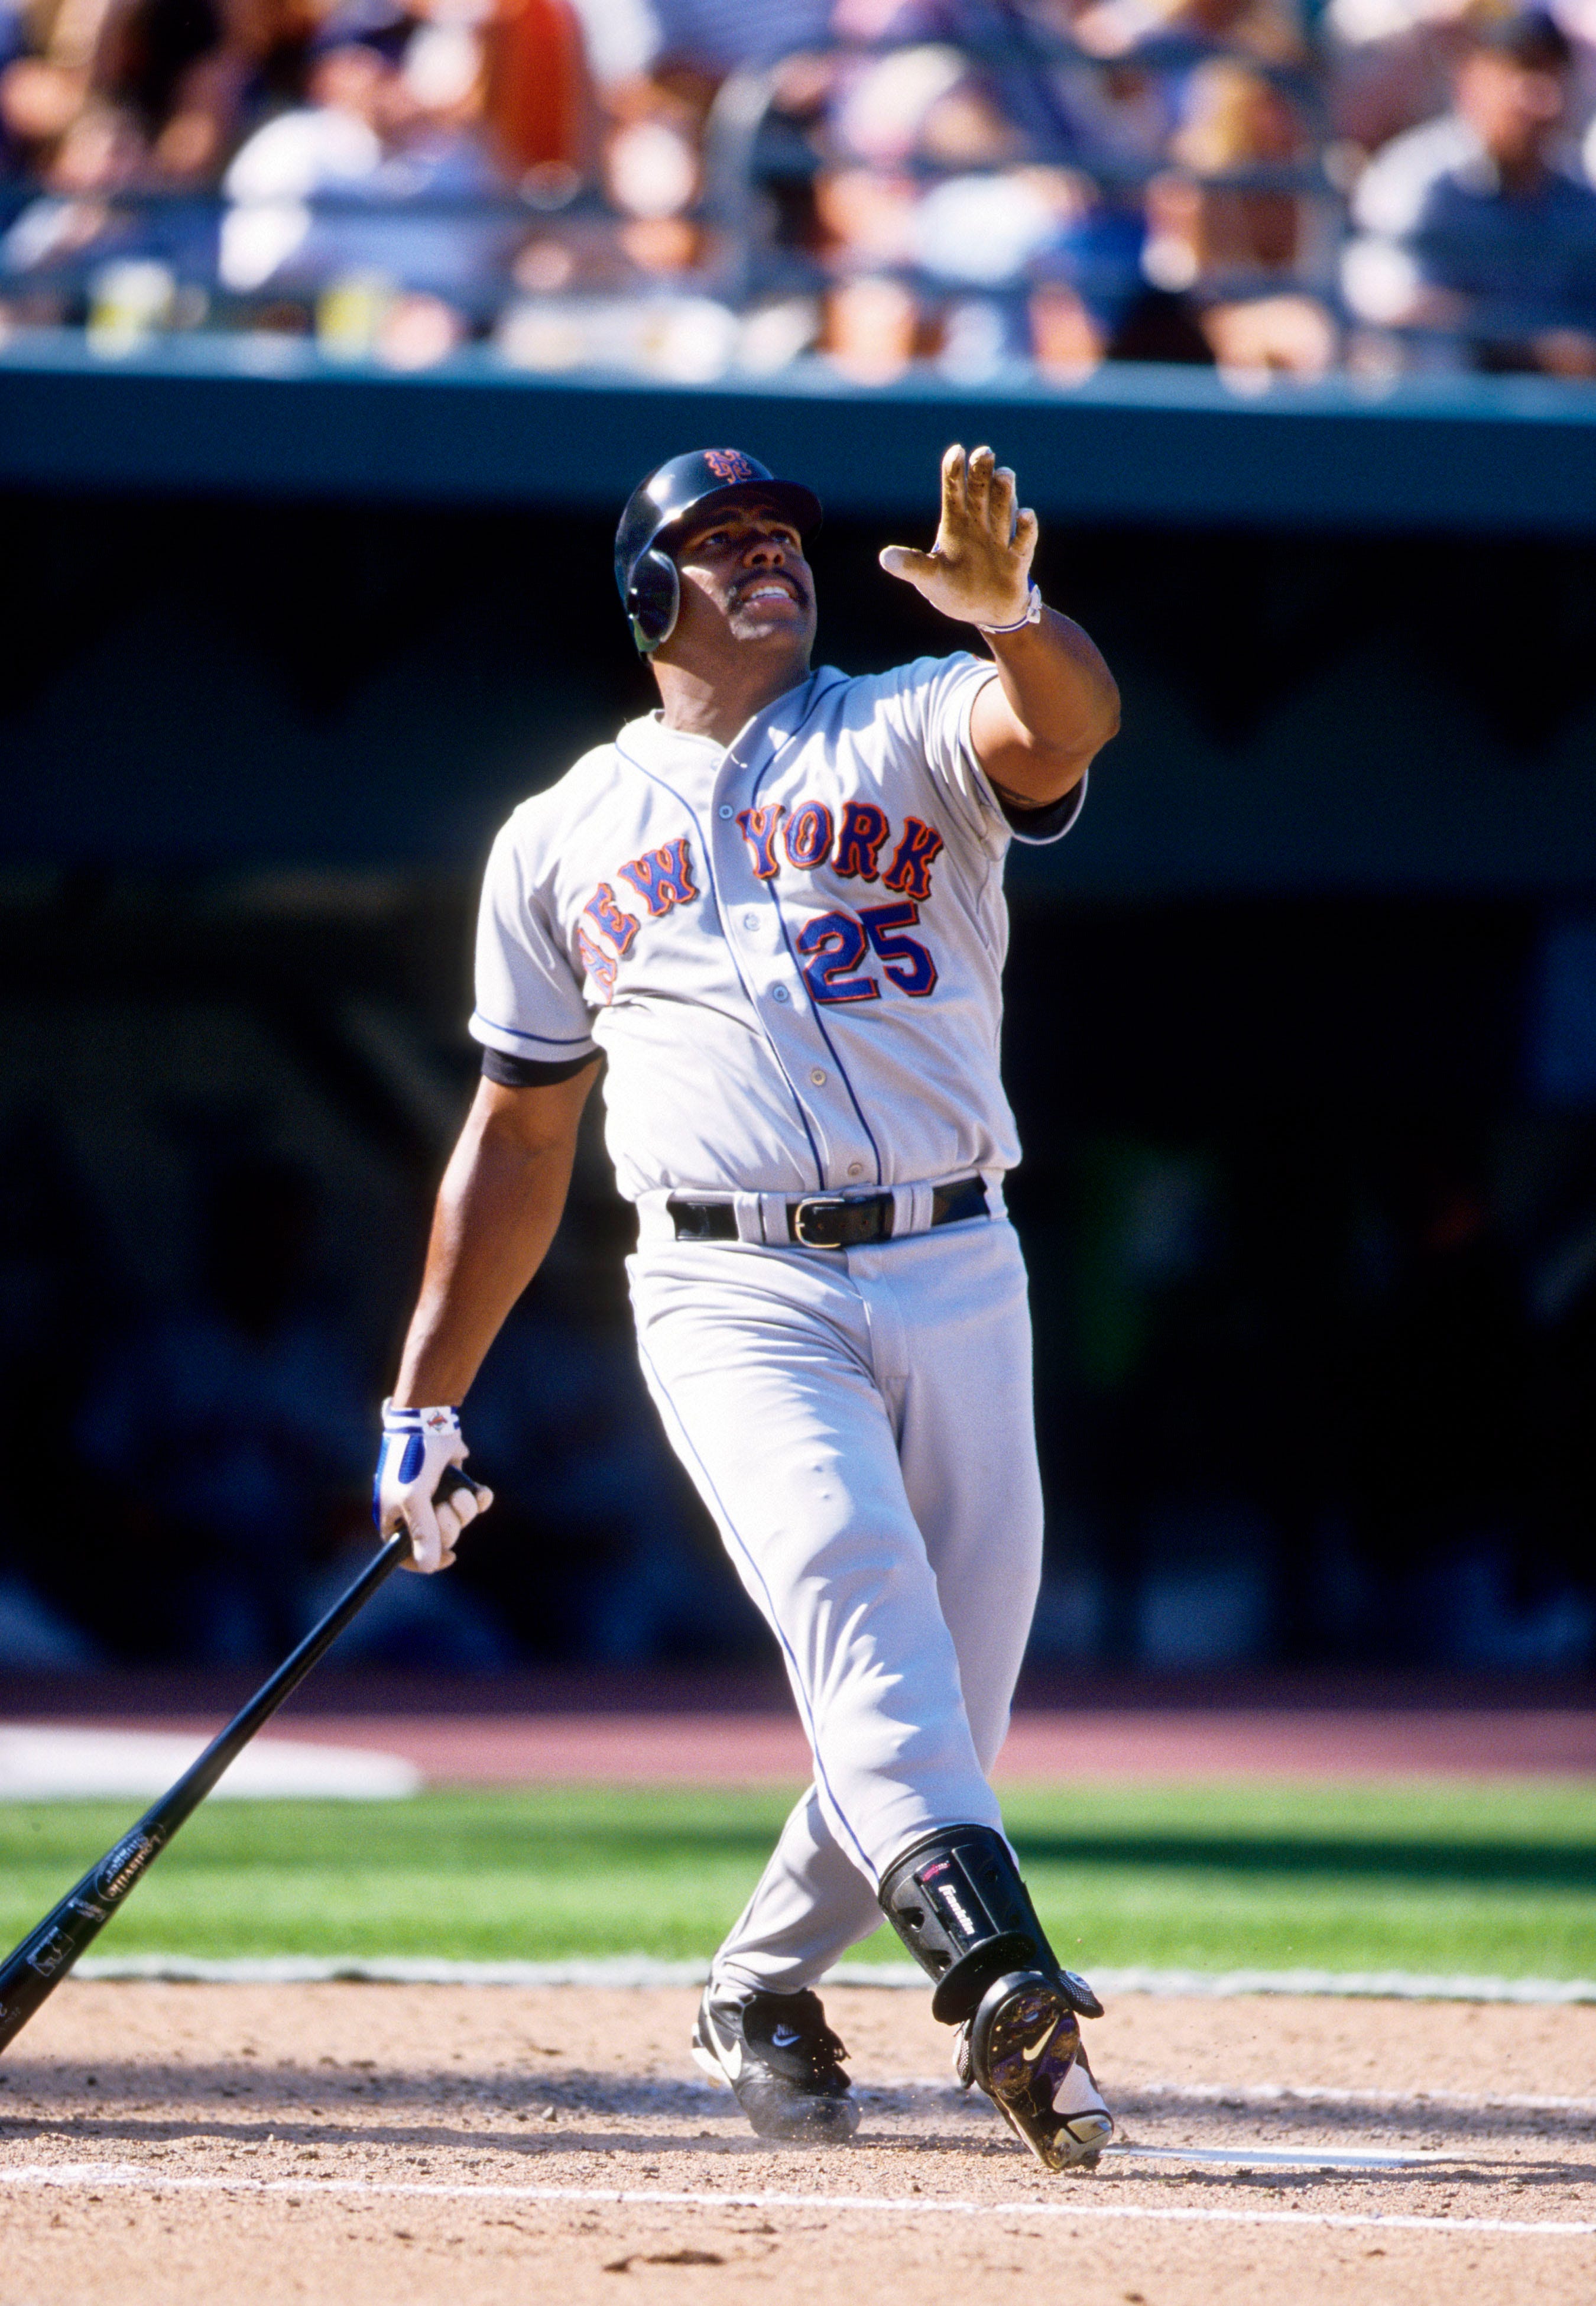 For Bobby Bonilla Day, Mint Mobile Is Offering a New Promo